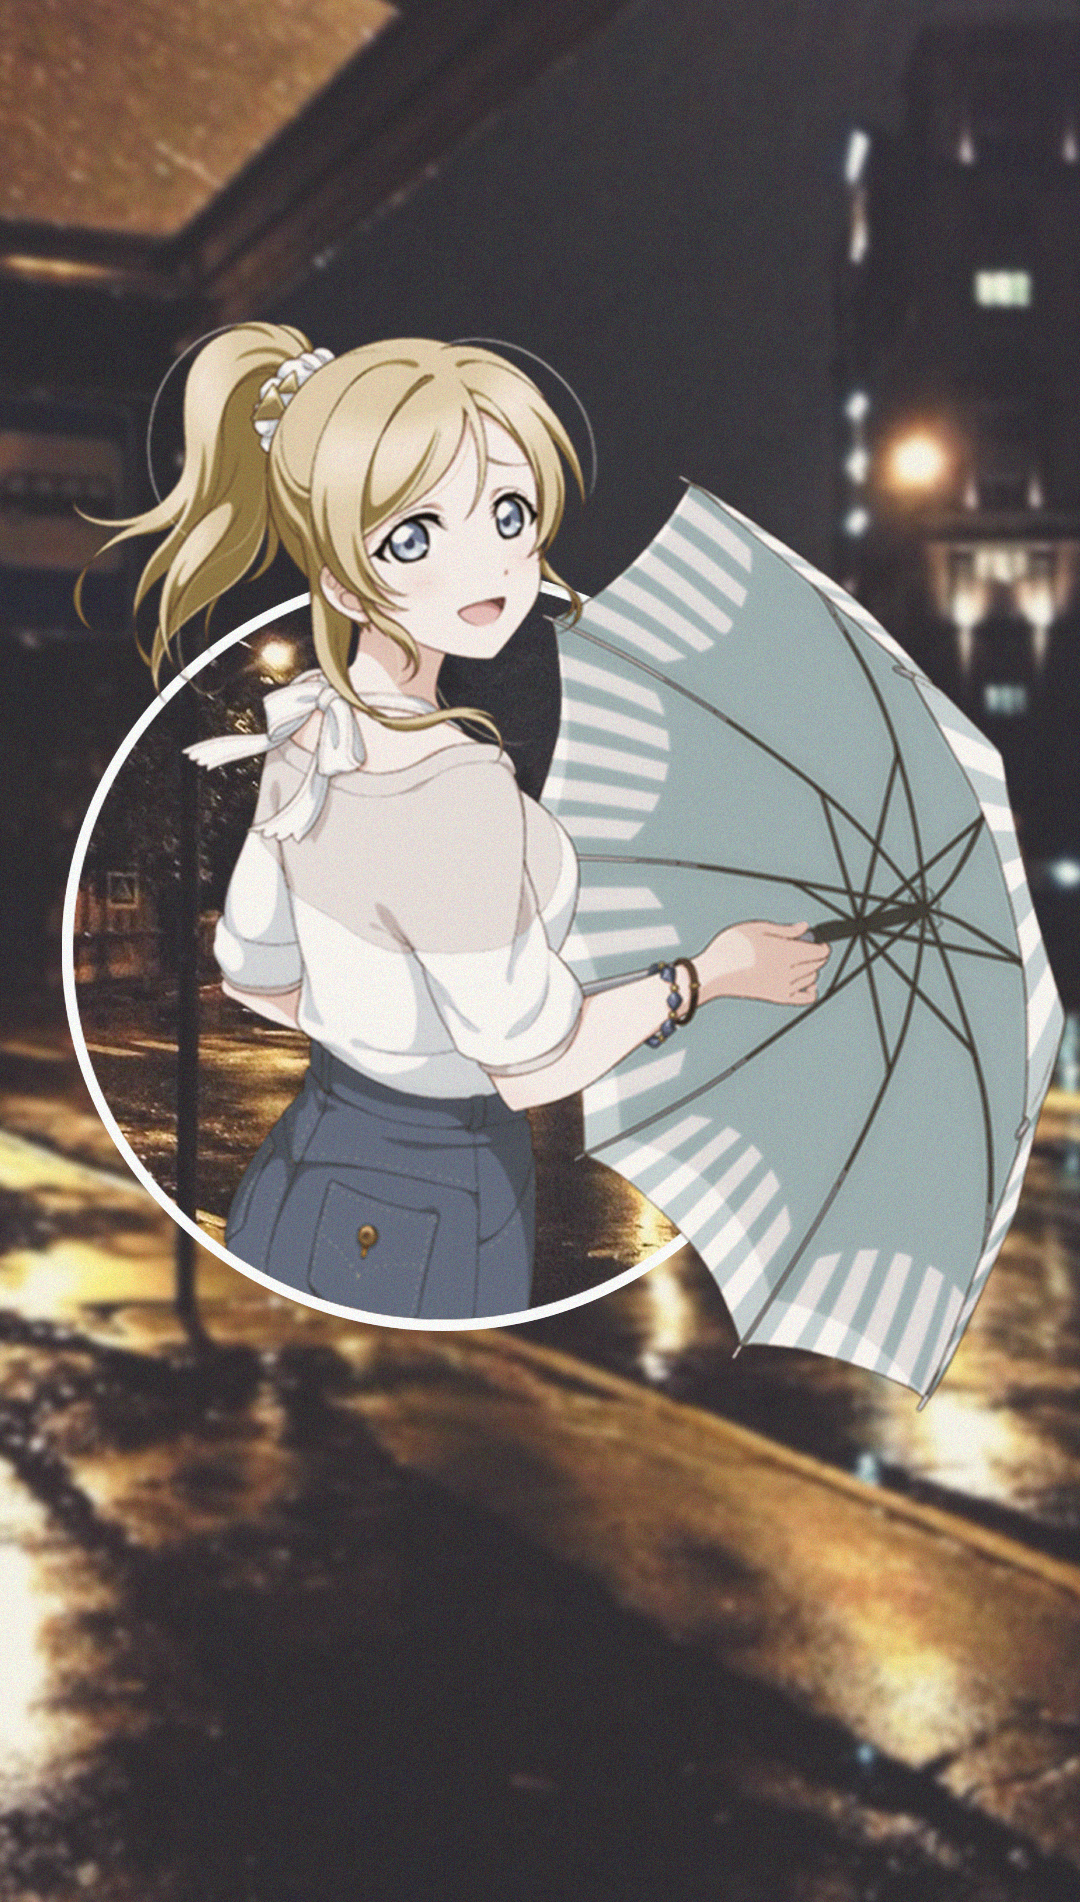 Anime 1080x1902 anime anime girls picture-in-picture Love Live! Ayase Eli